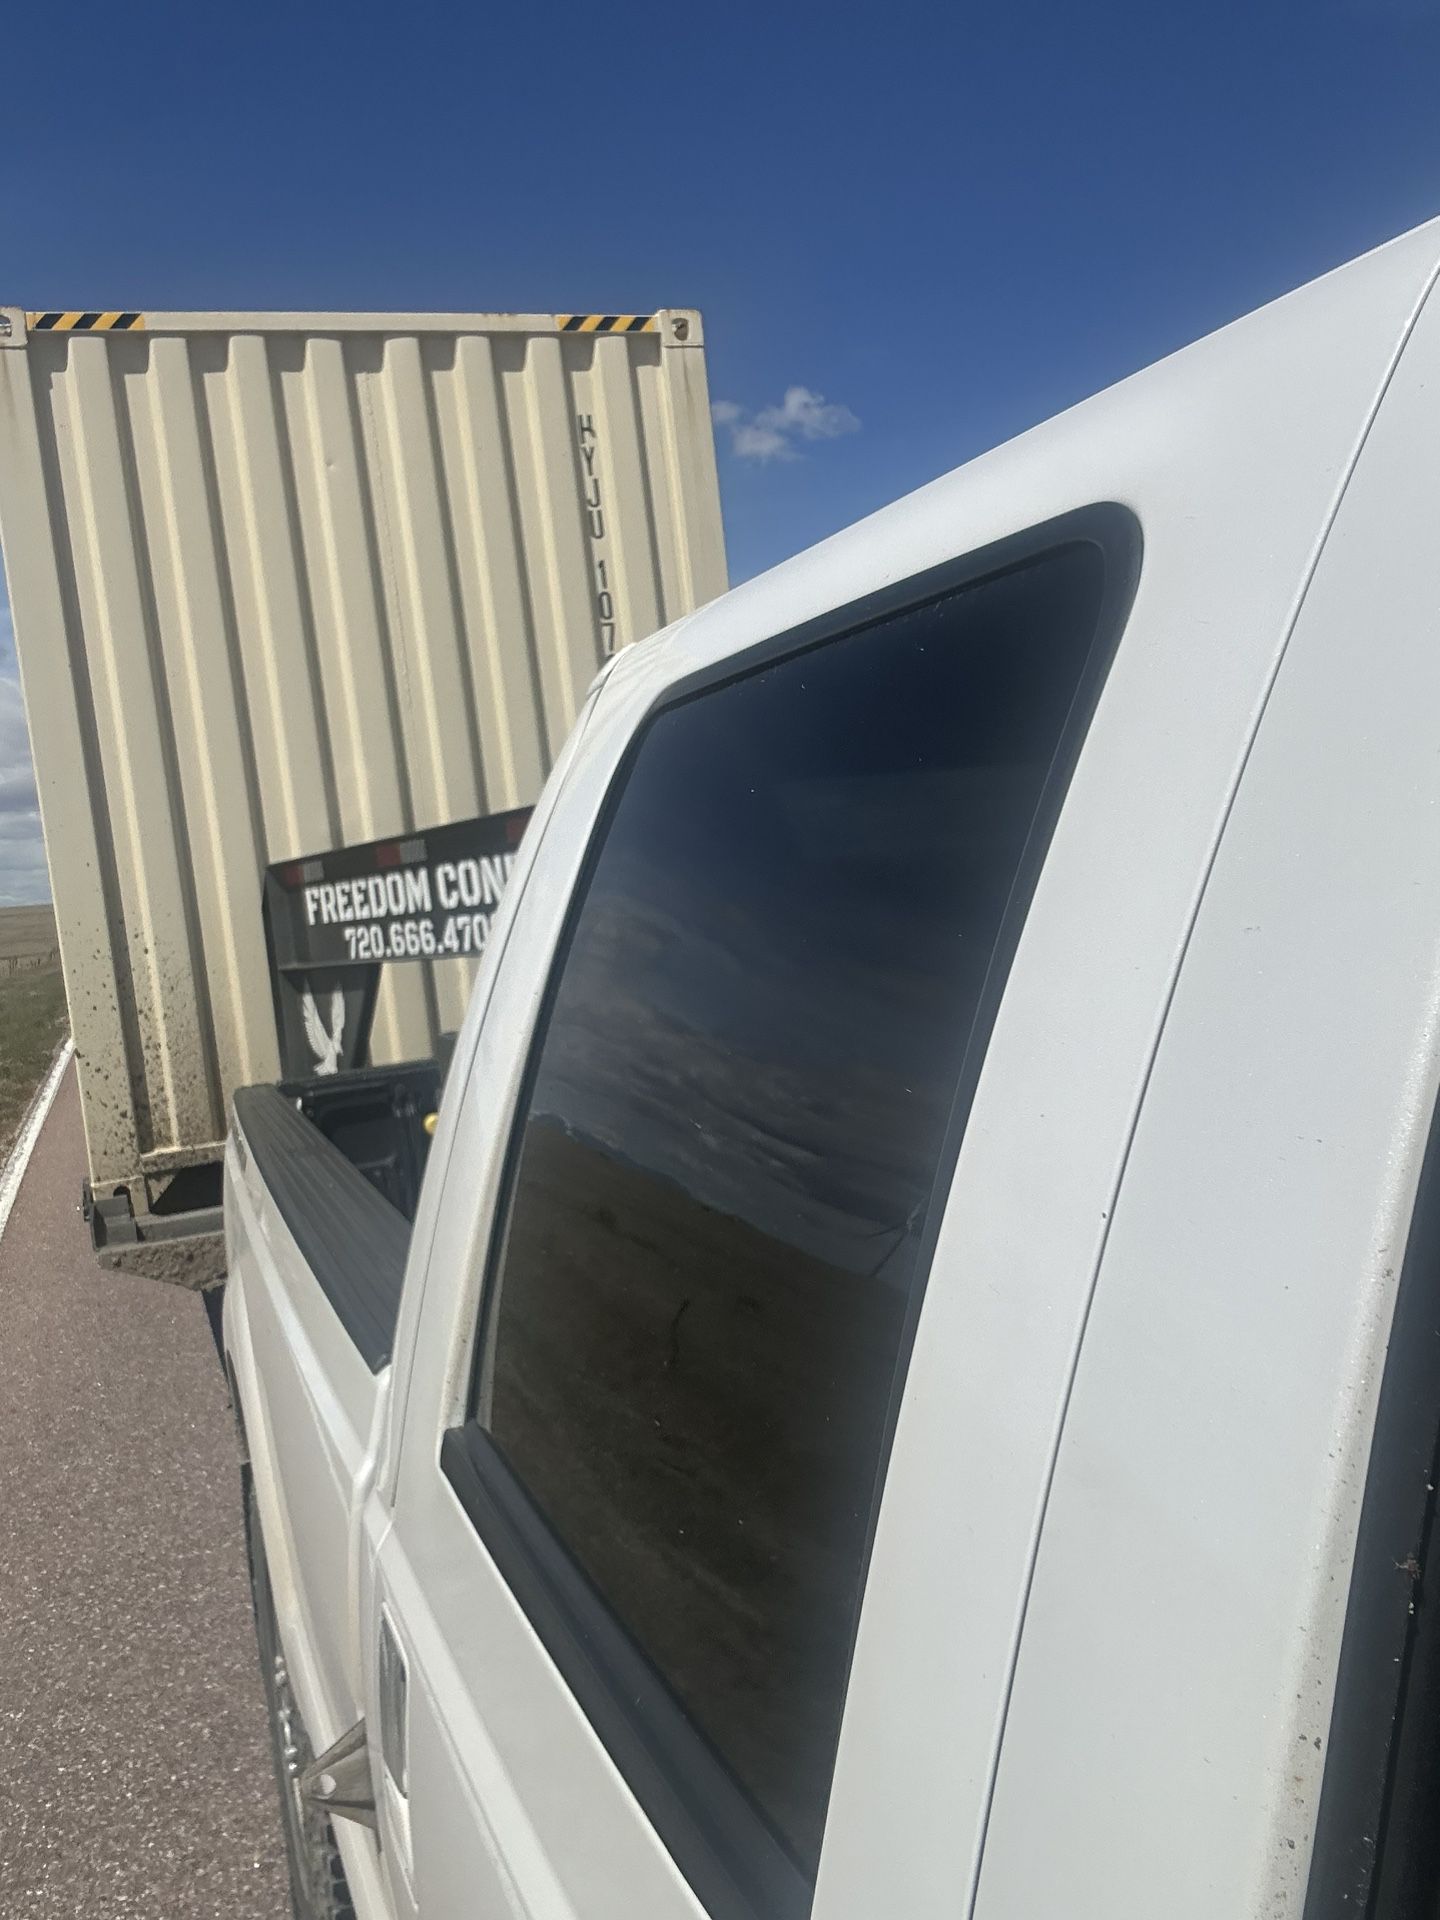 Shipping Containers on SALE!! 20’, 40’, & 40HC